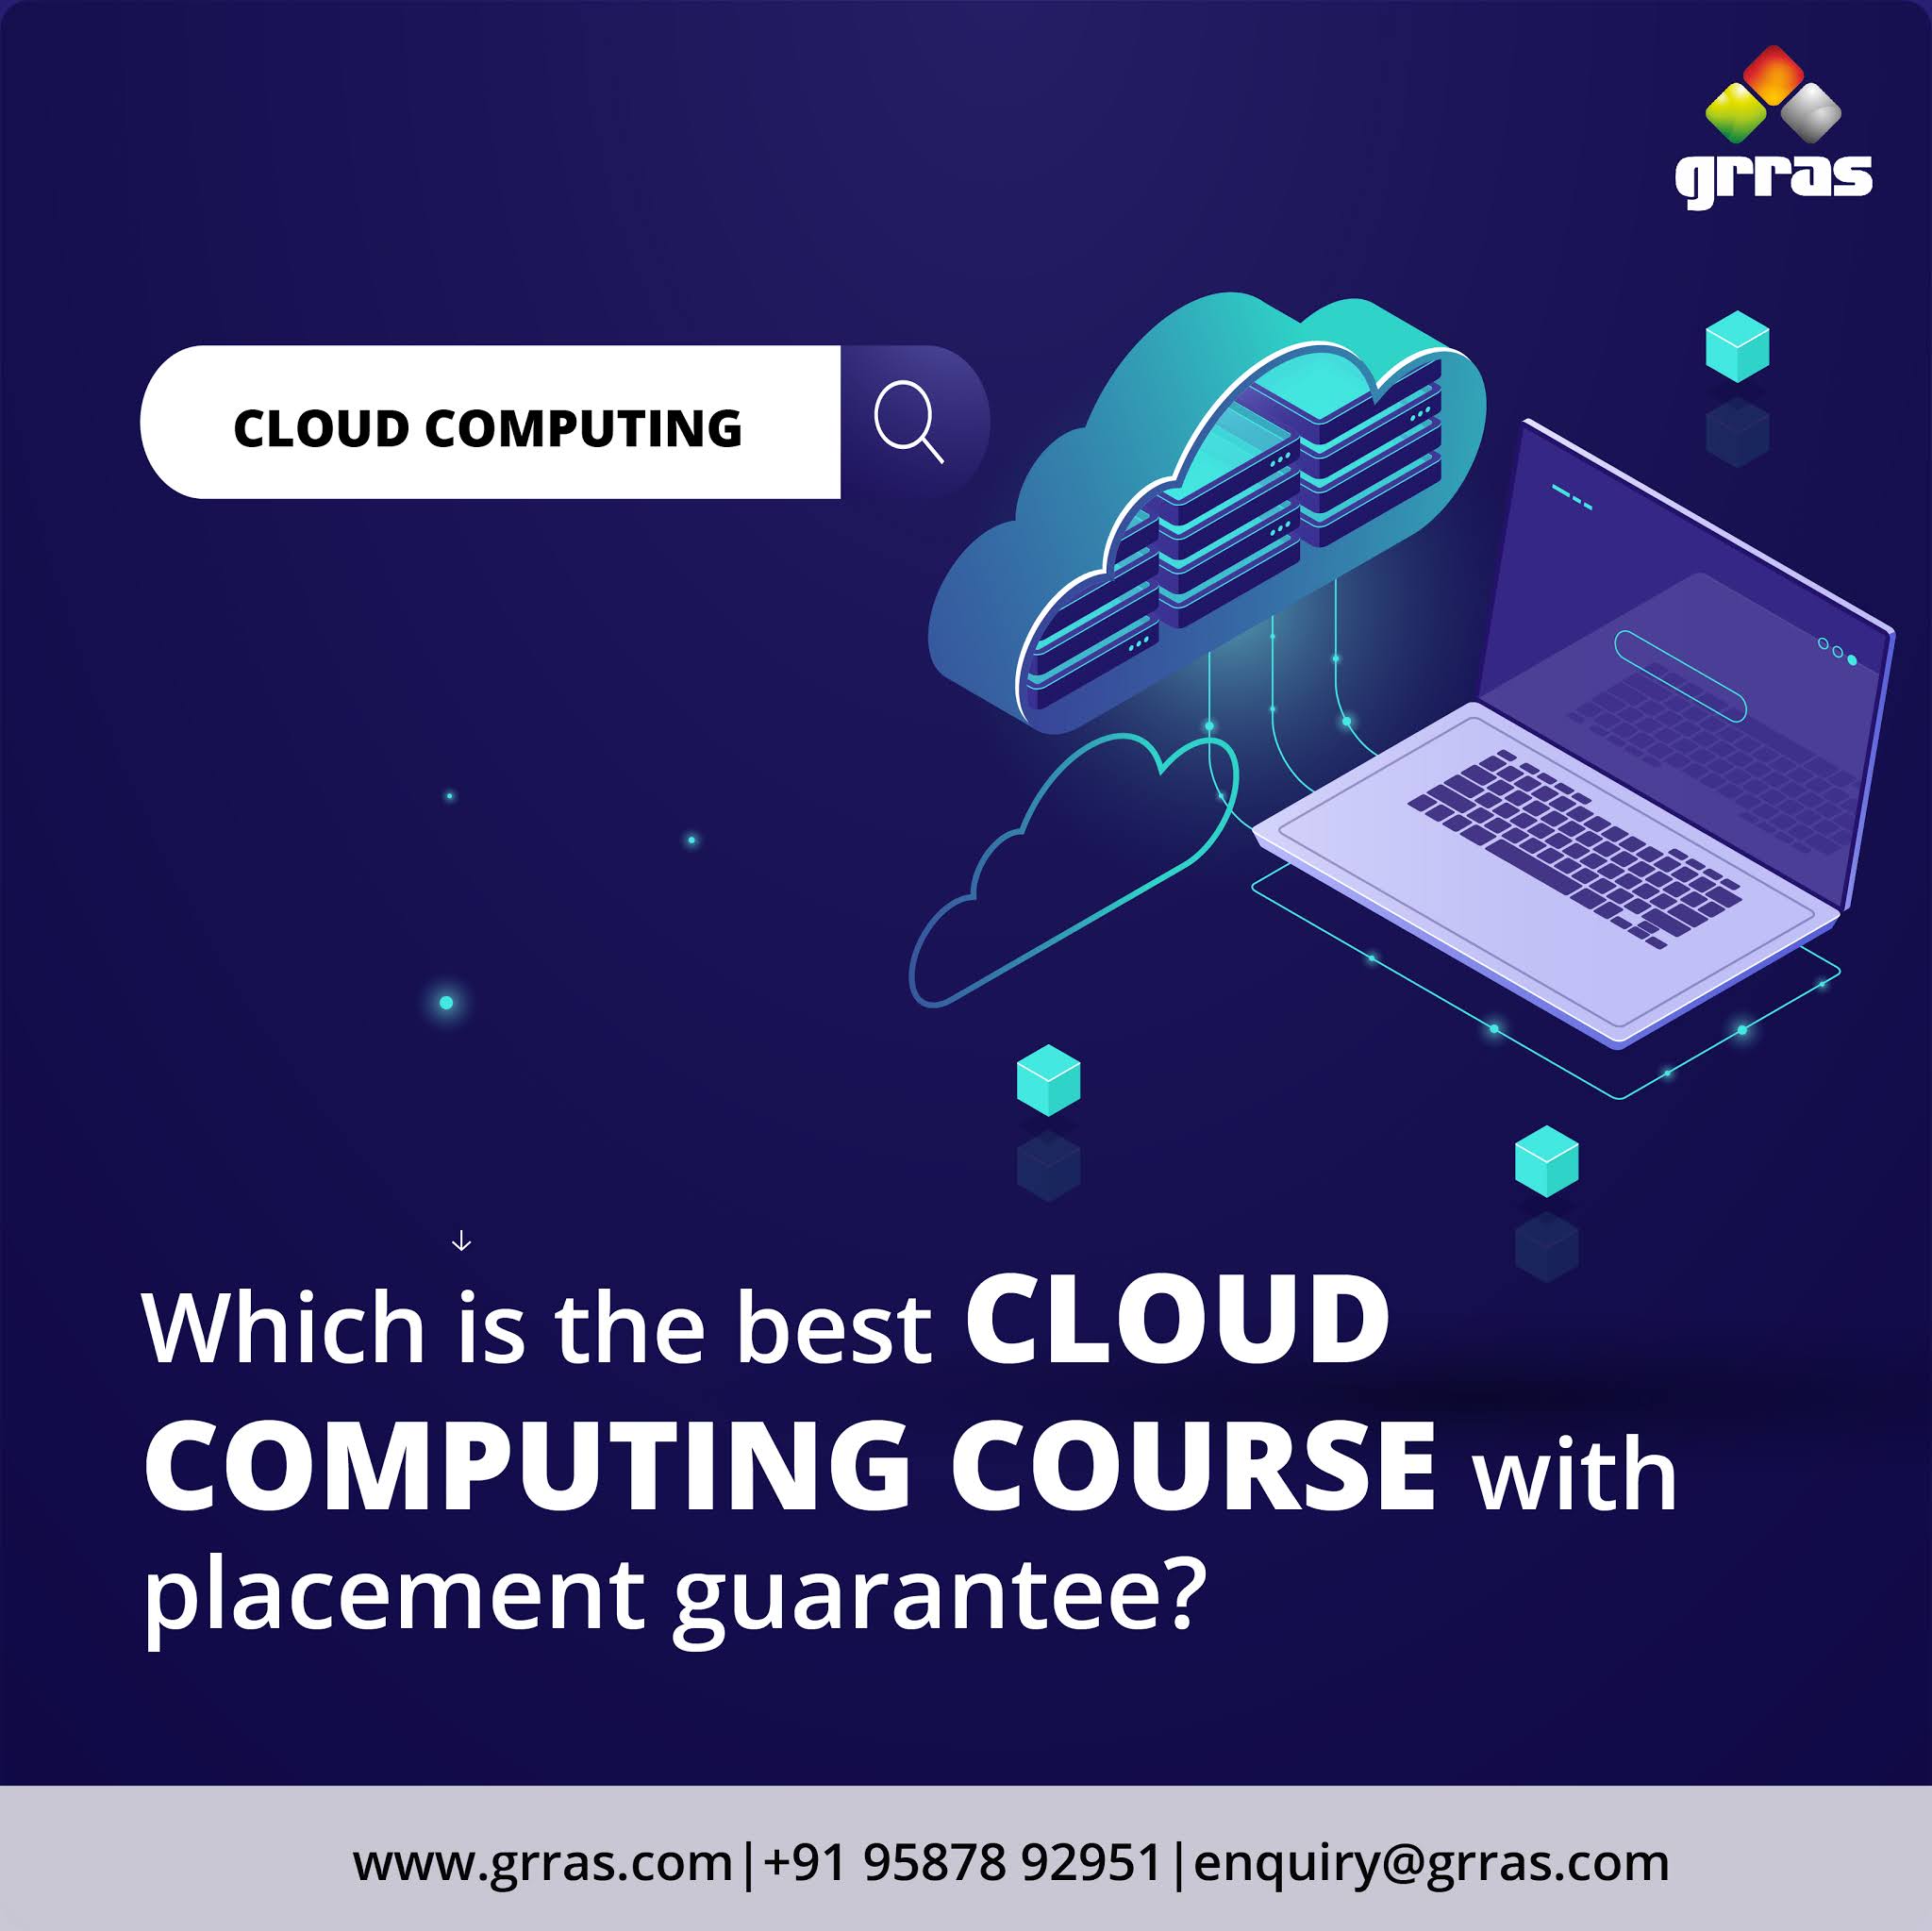 Which is the best Cloud Computing Course with Placement Guarantee?